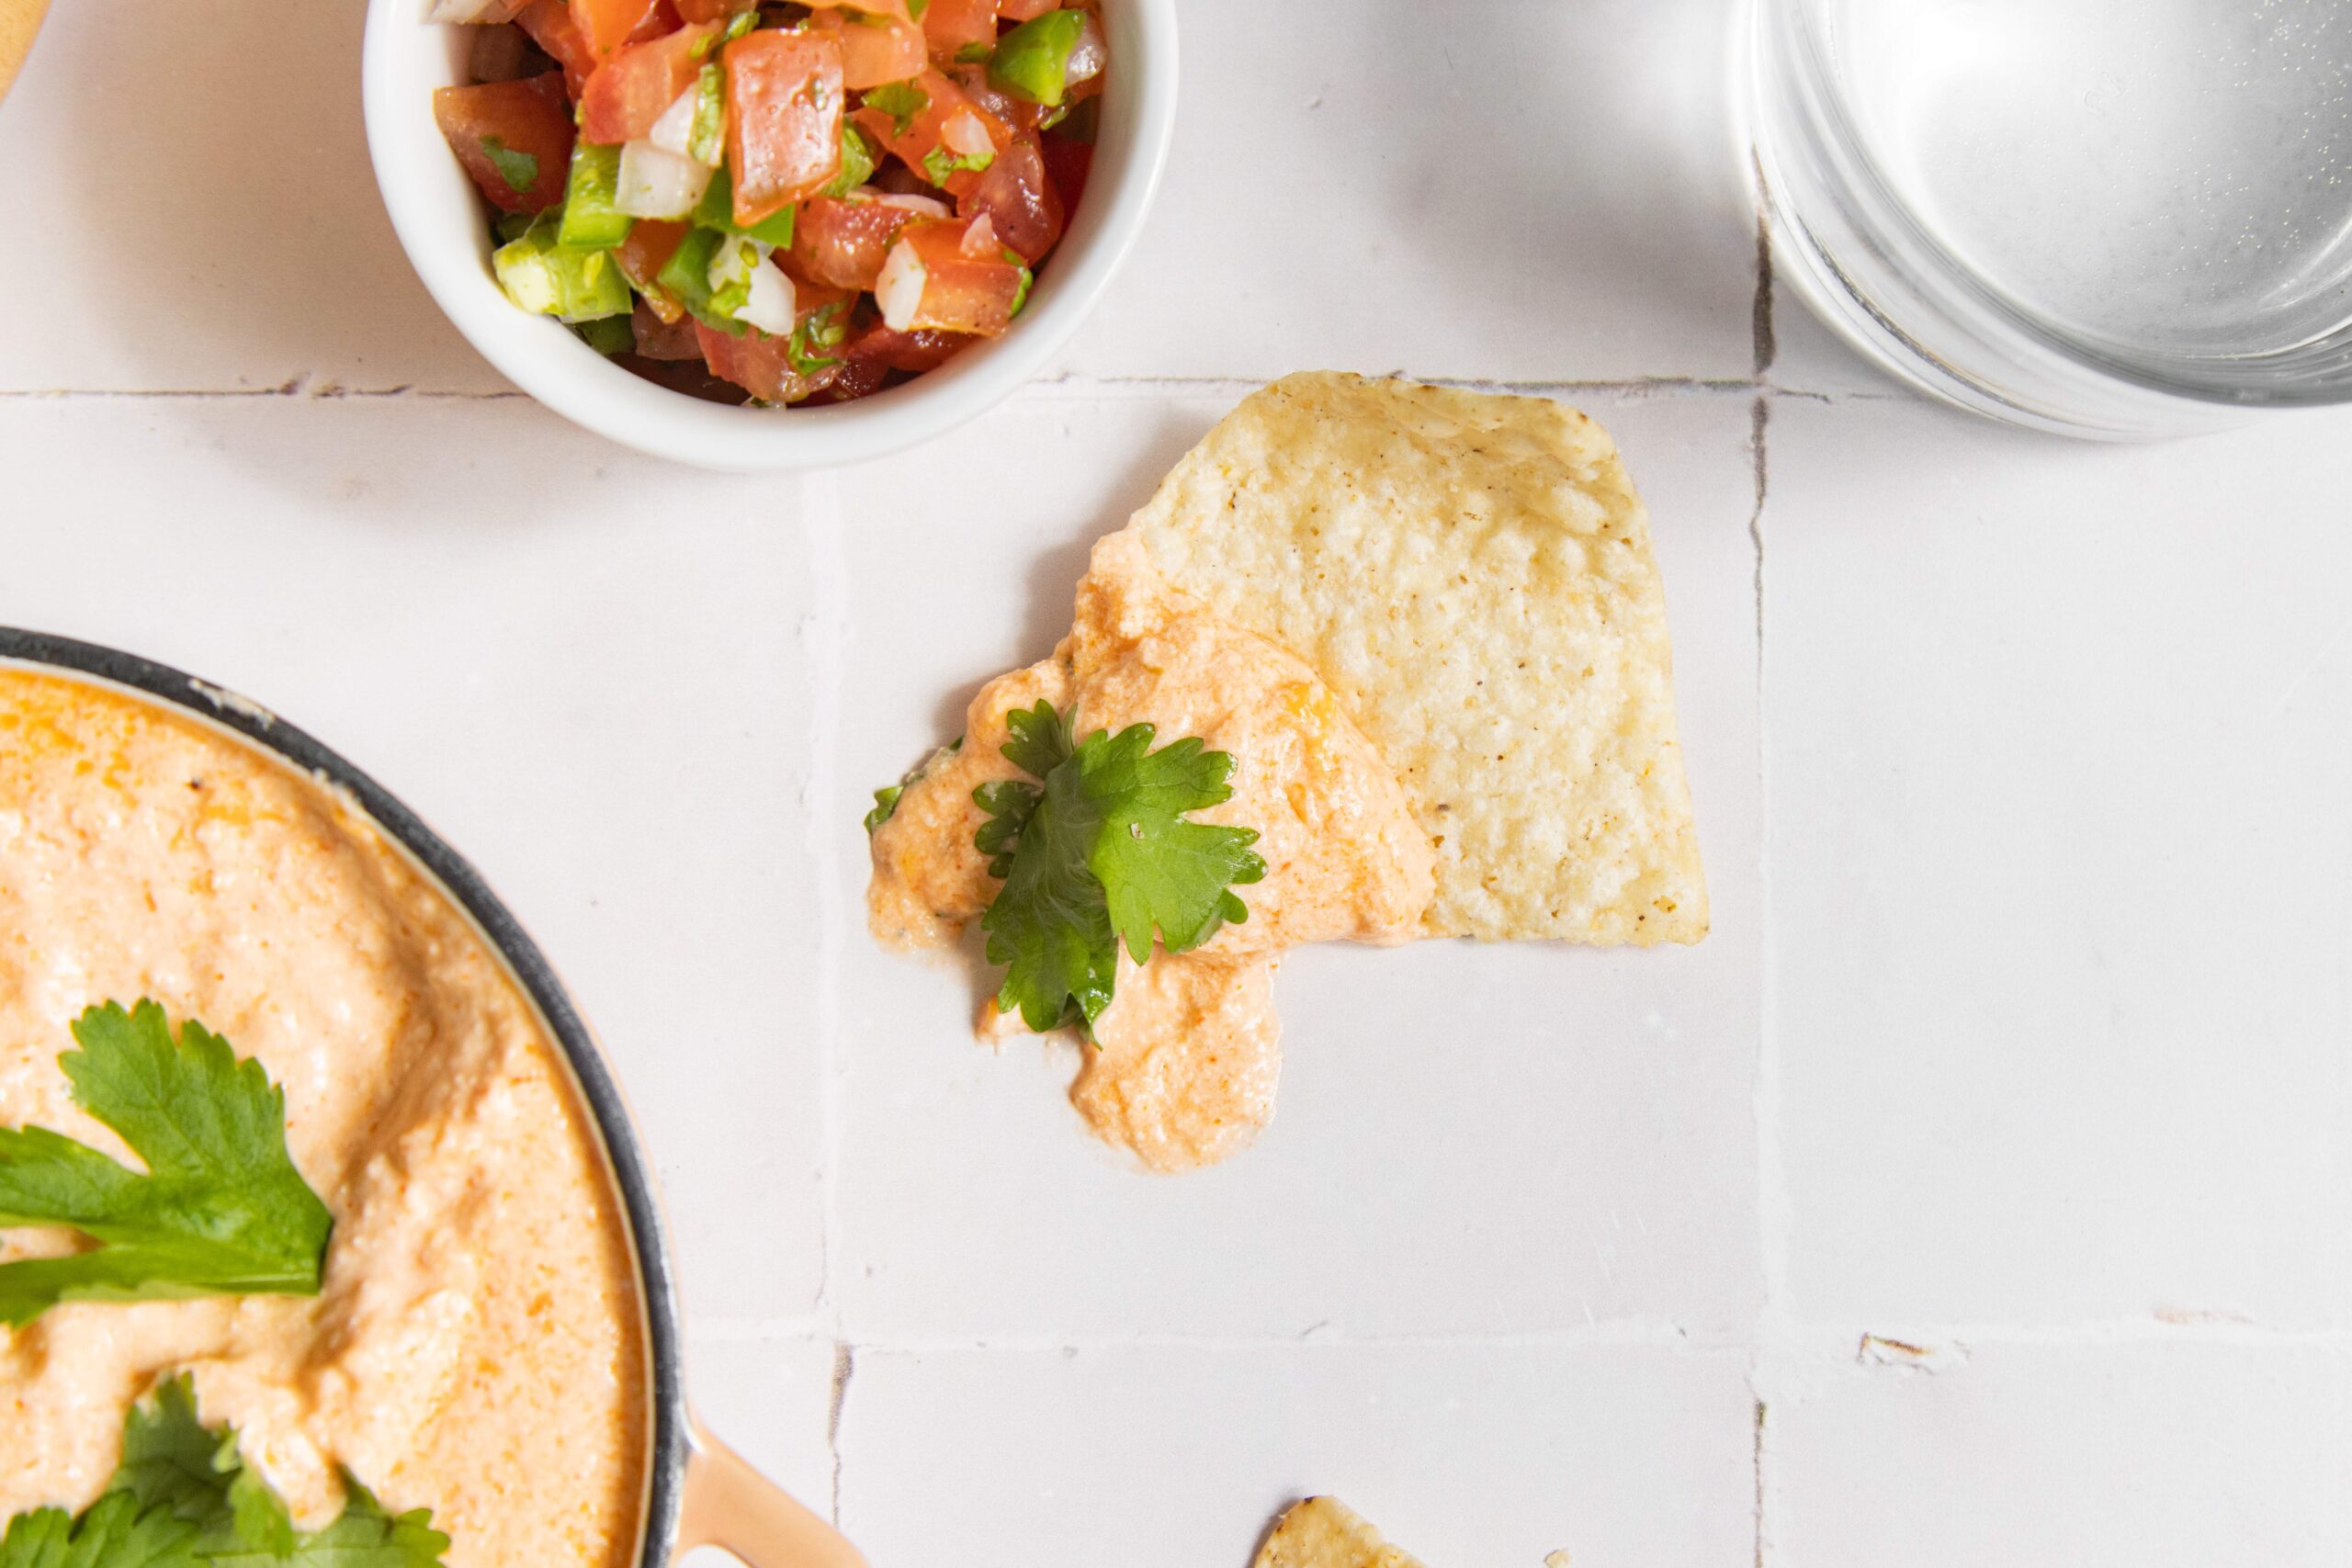 high protein meals and snacks queso dip